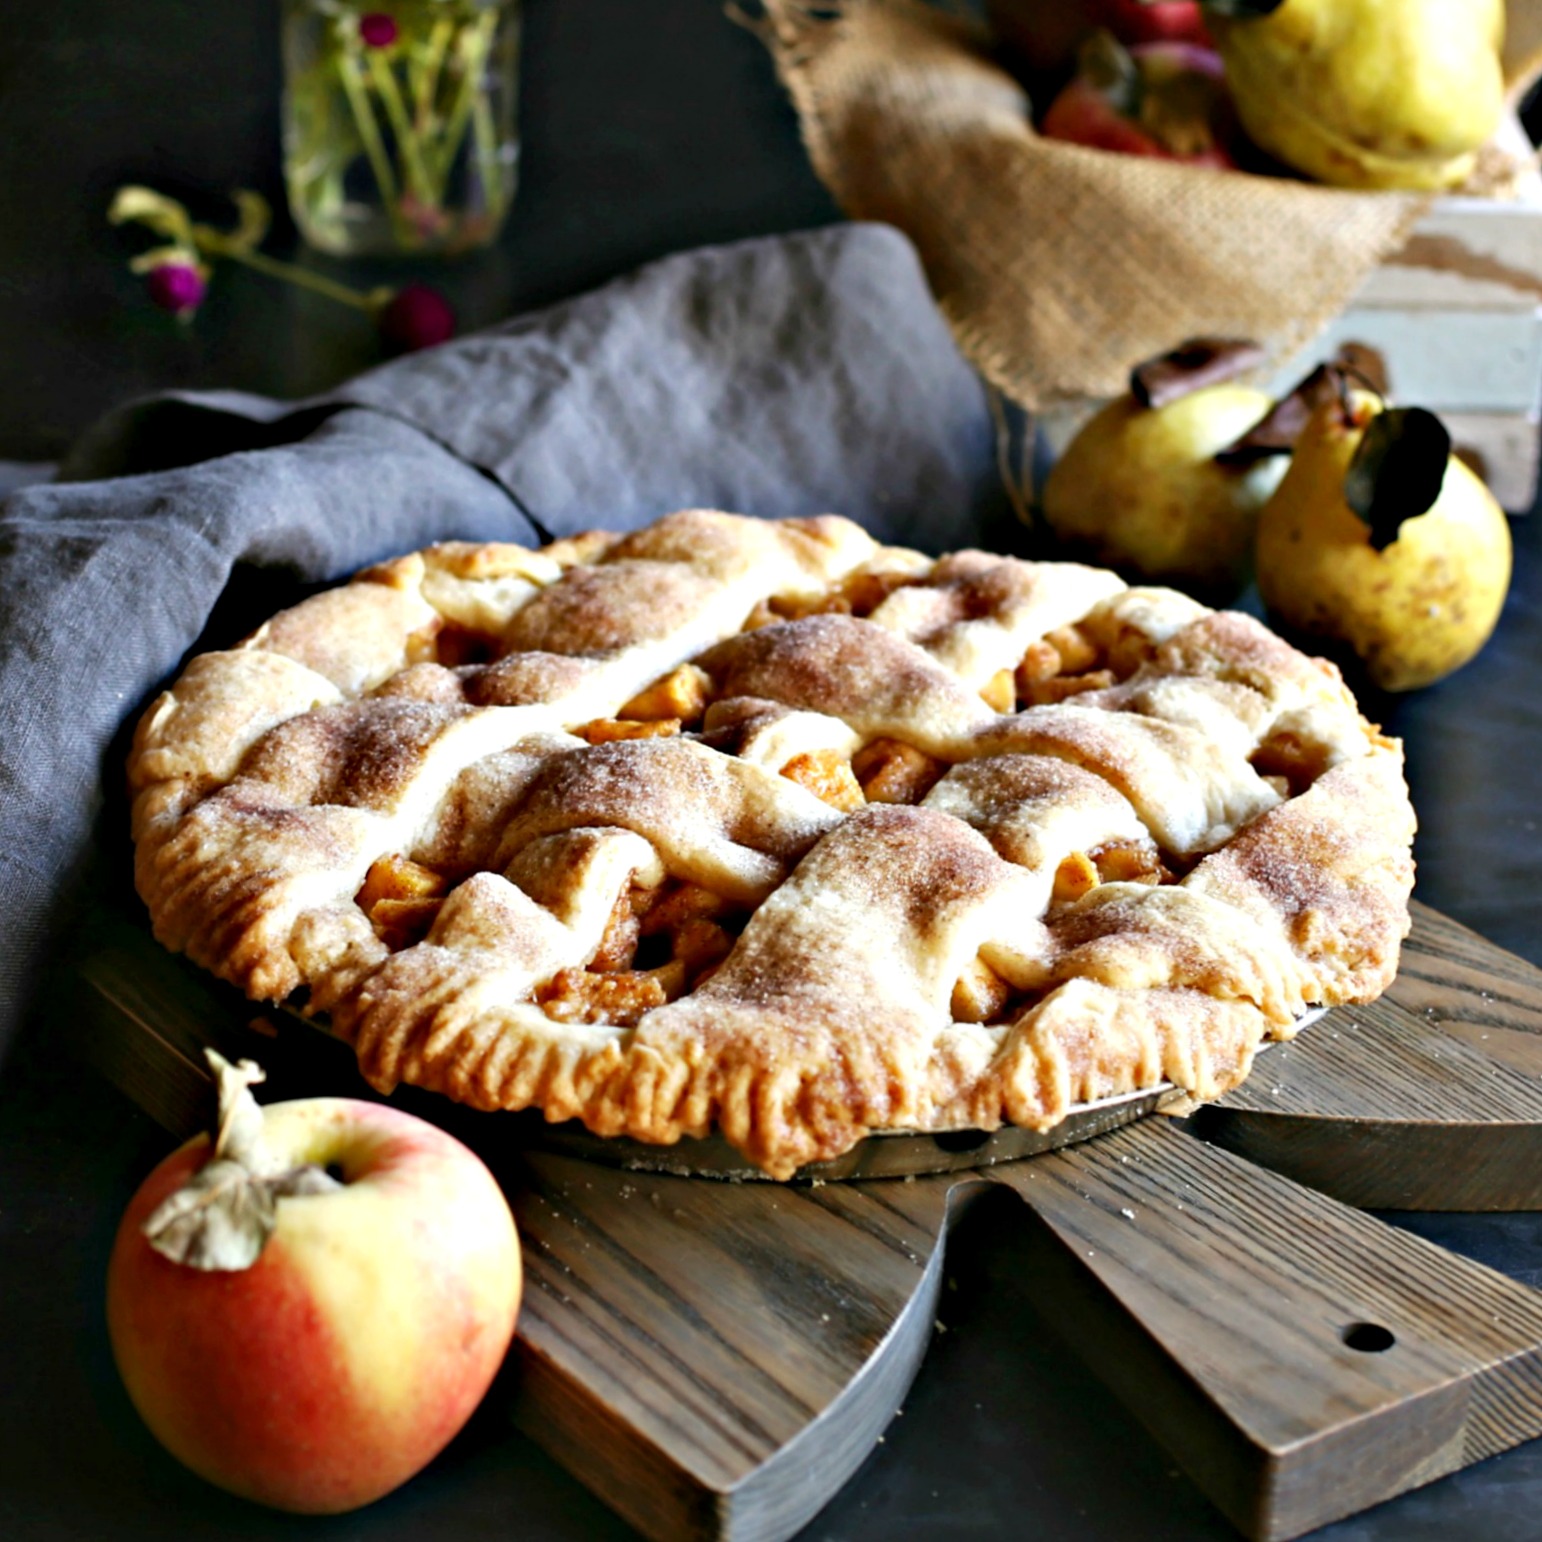 Recipe for an apple and pear pie with a homemade butter crust.